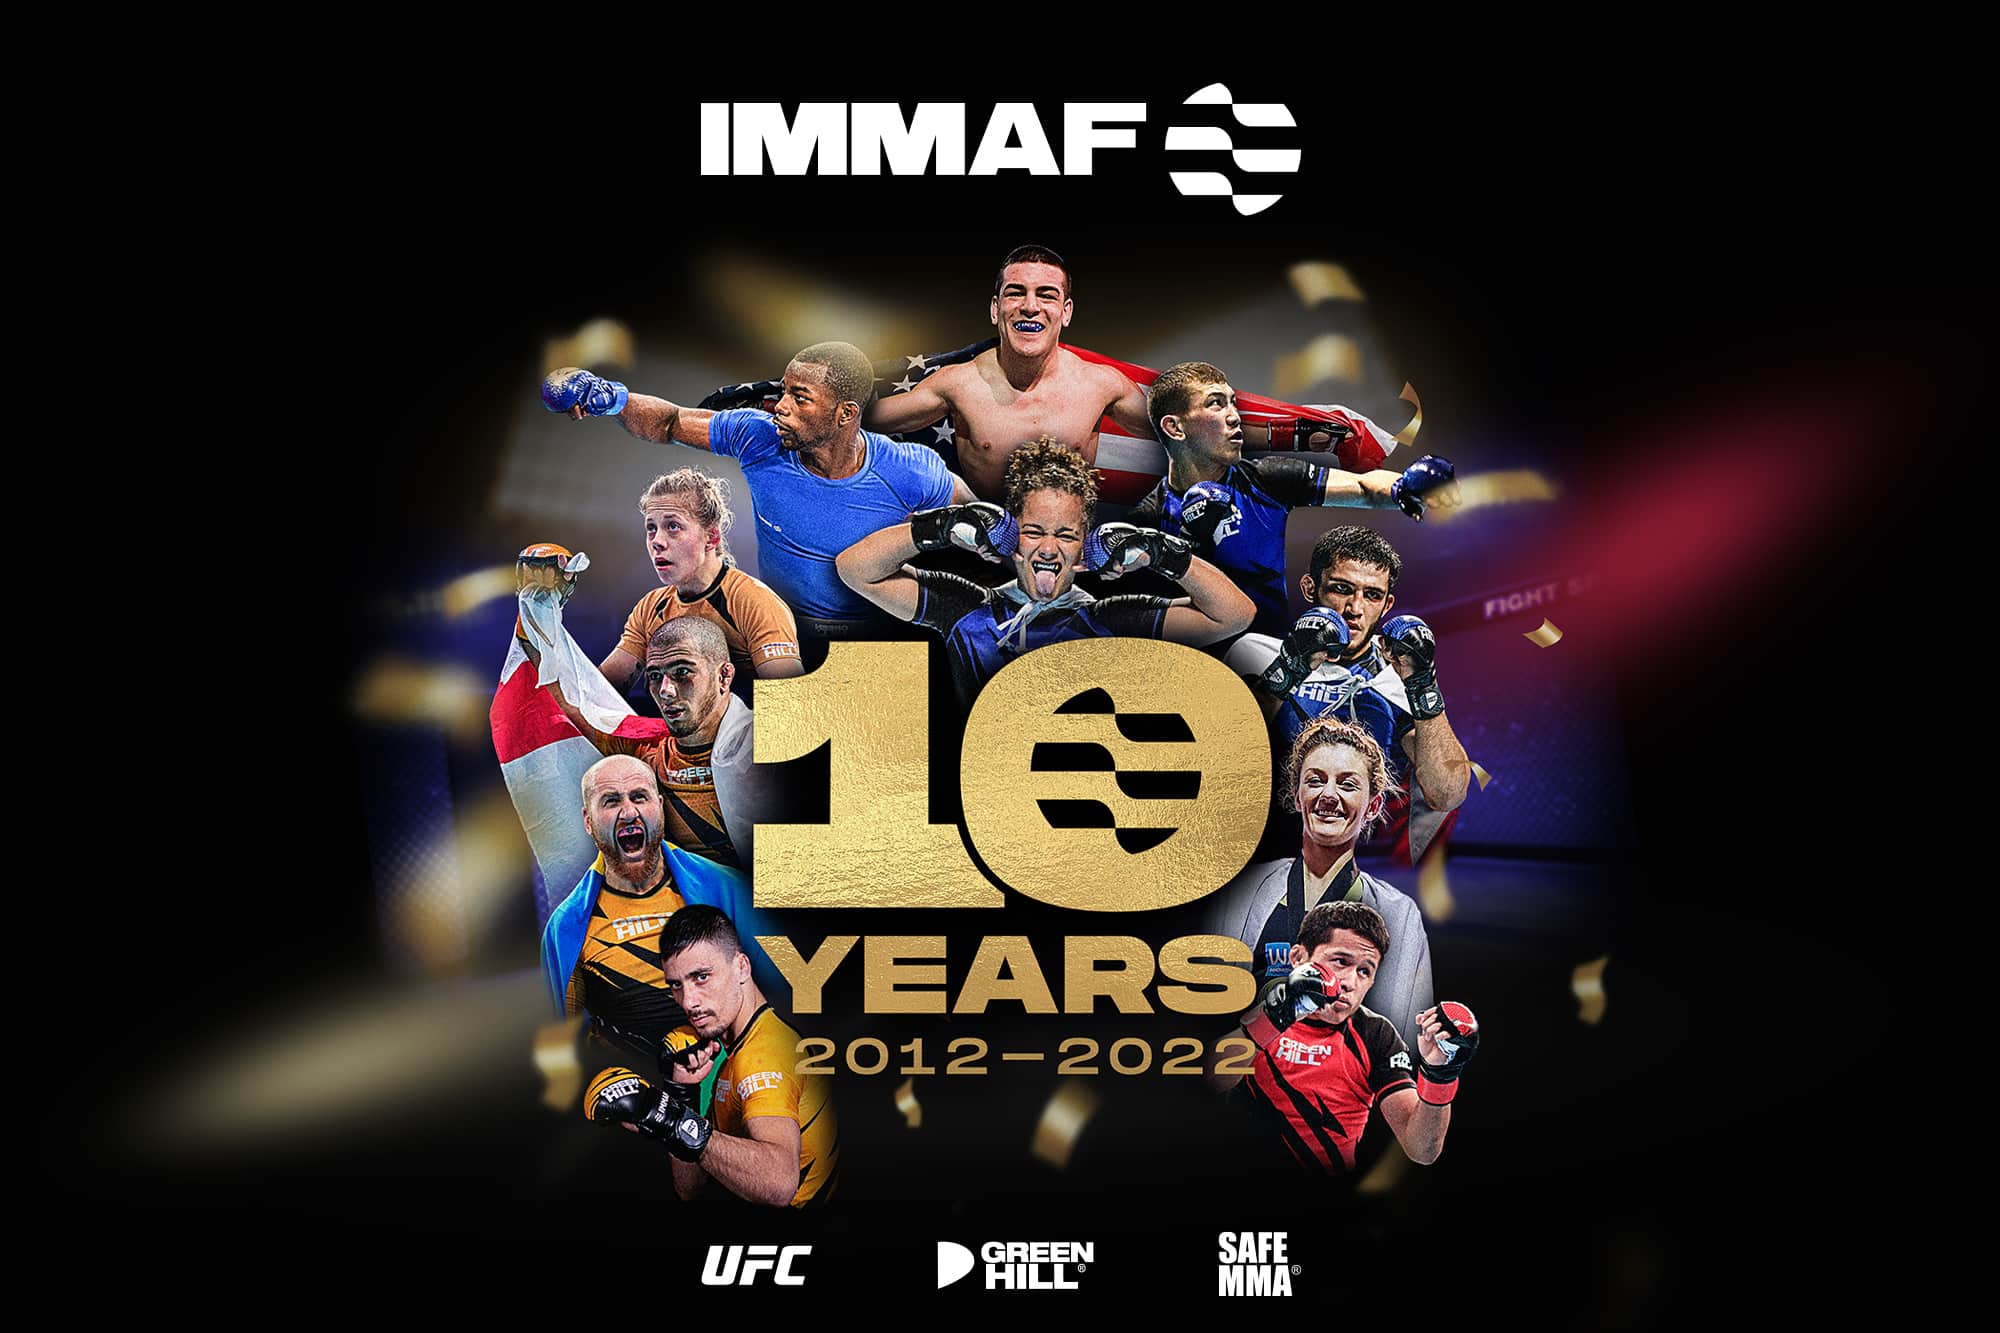 IMMAF is 10 years old!